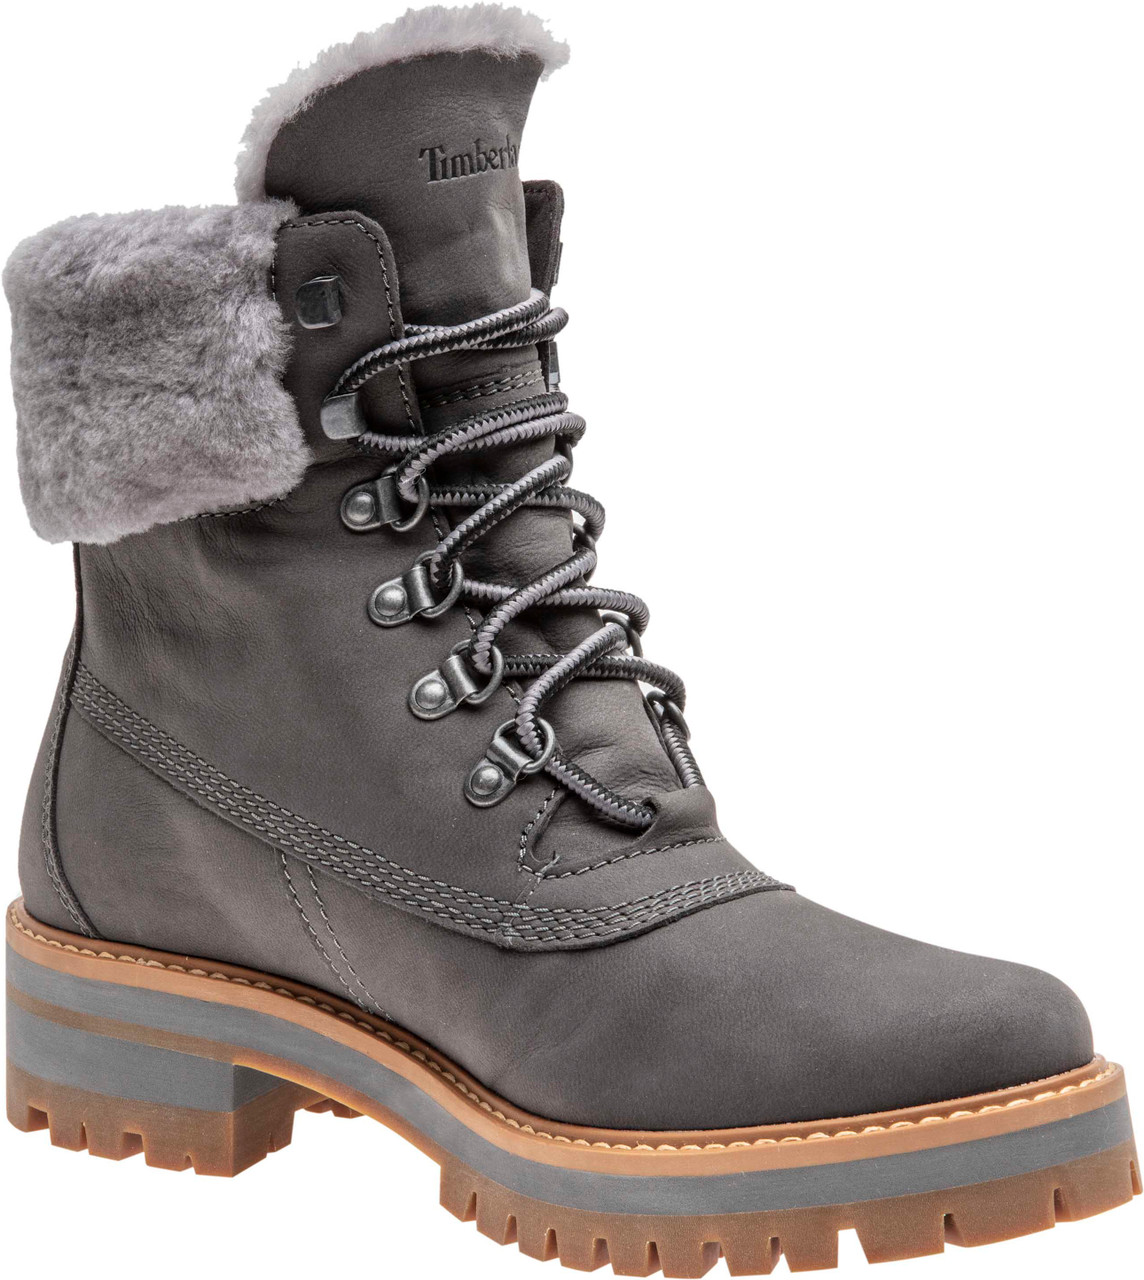 6 inch shearling boot for women in grey